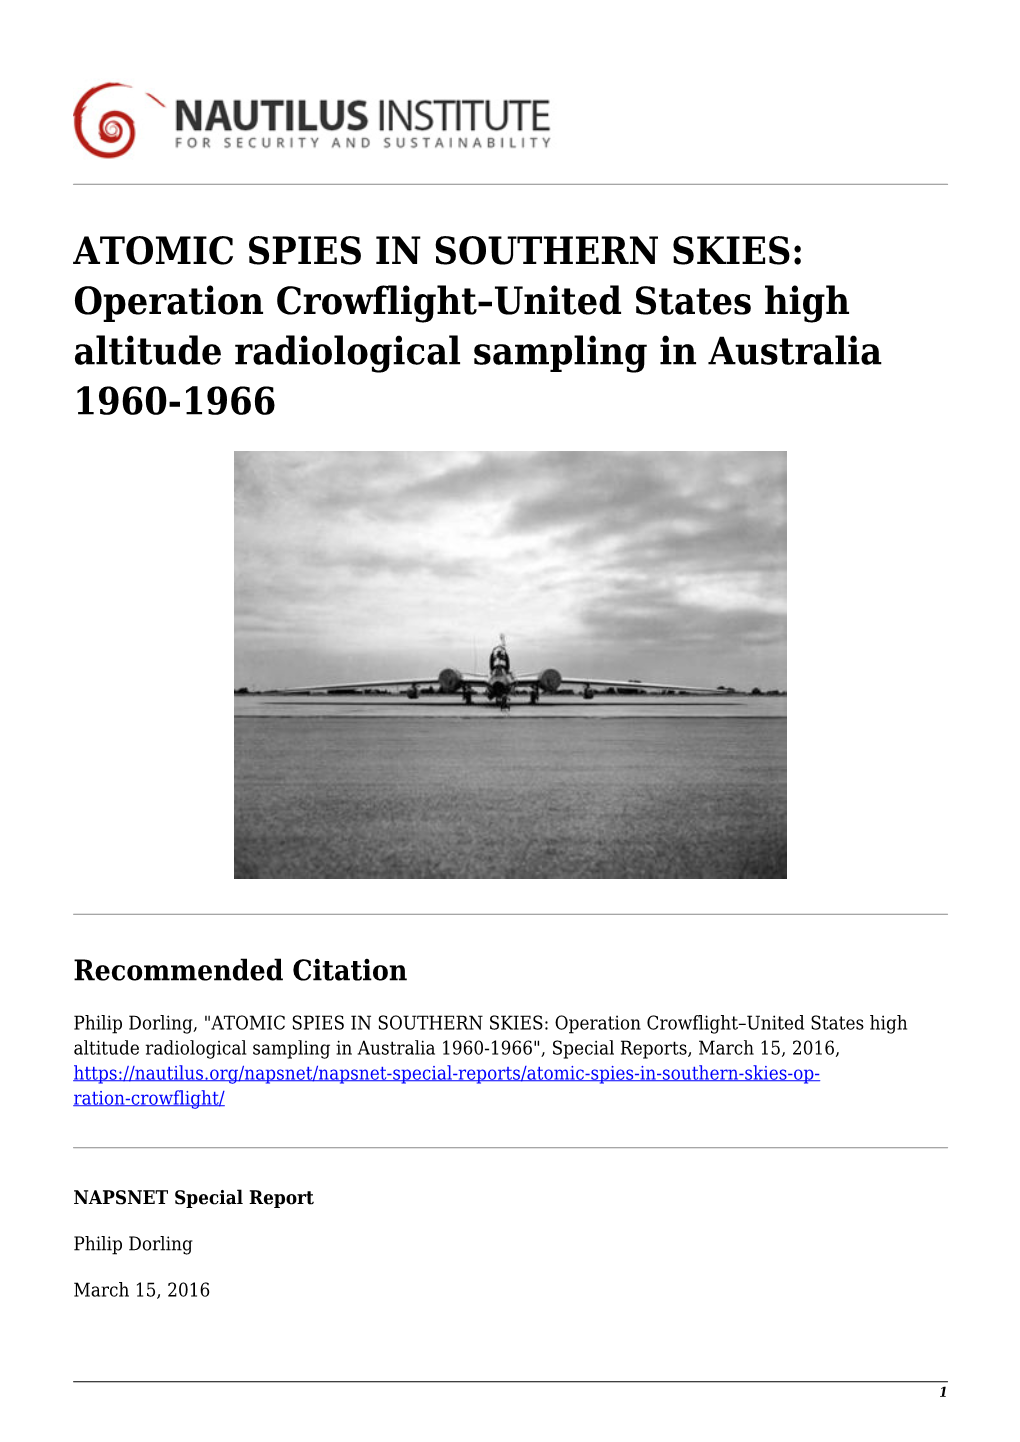 ATOMIC SPIES in SOUTHERN SKIES: Operation Crowflight–United States High Altitude Radiological Sampling in Australia 1960-1966